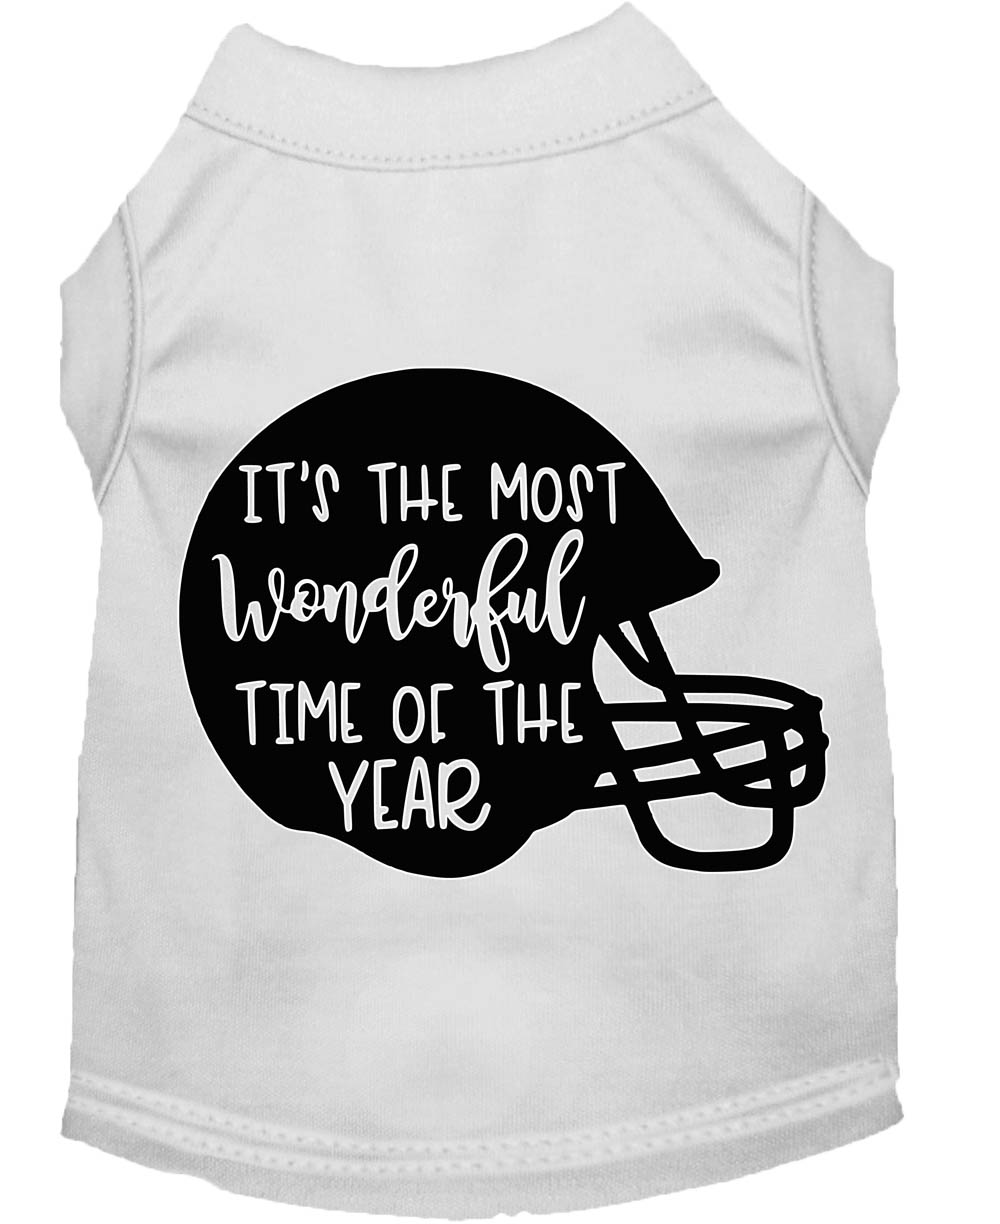 Most Wonderful Time of the Year (Football) Screen Print Dog Shirt White Sm